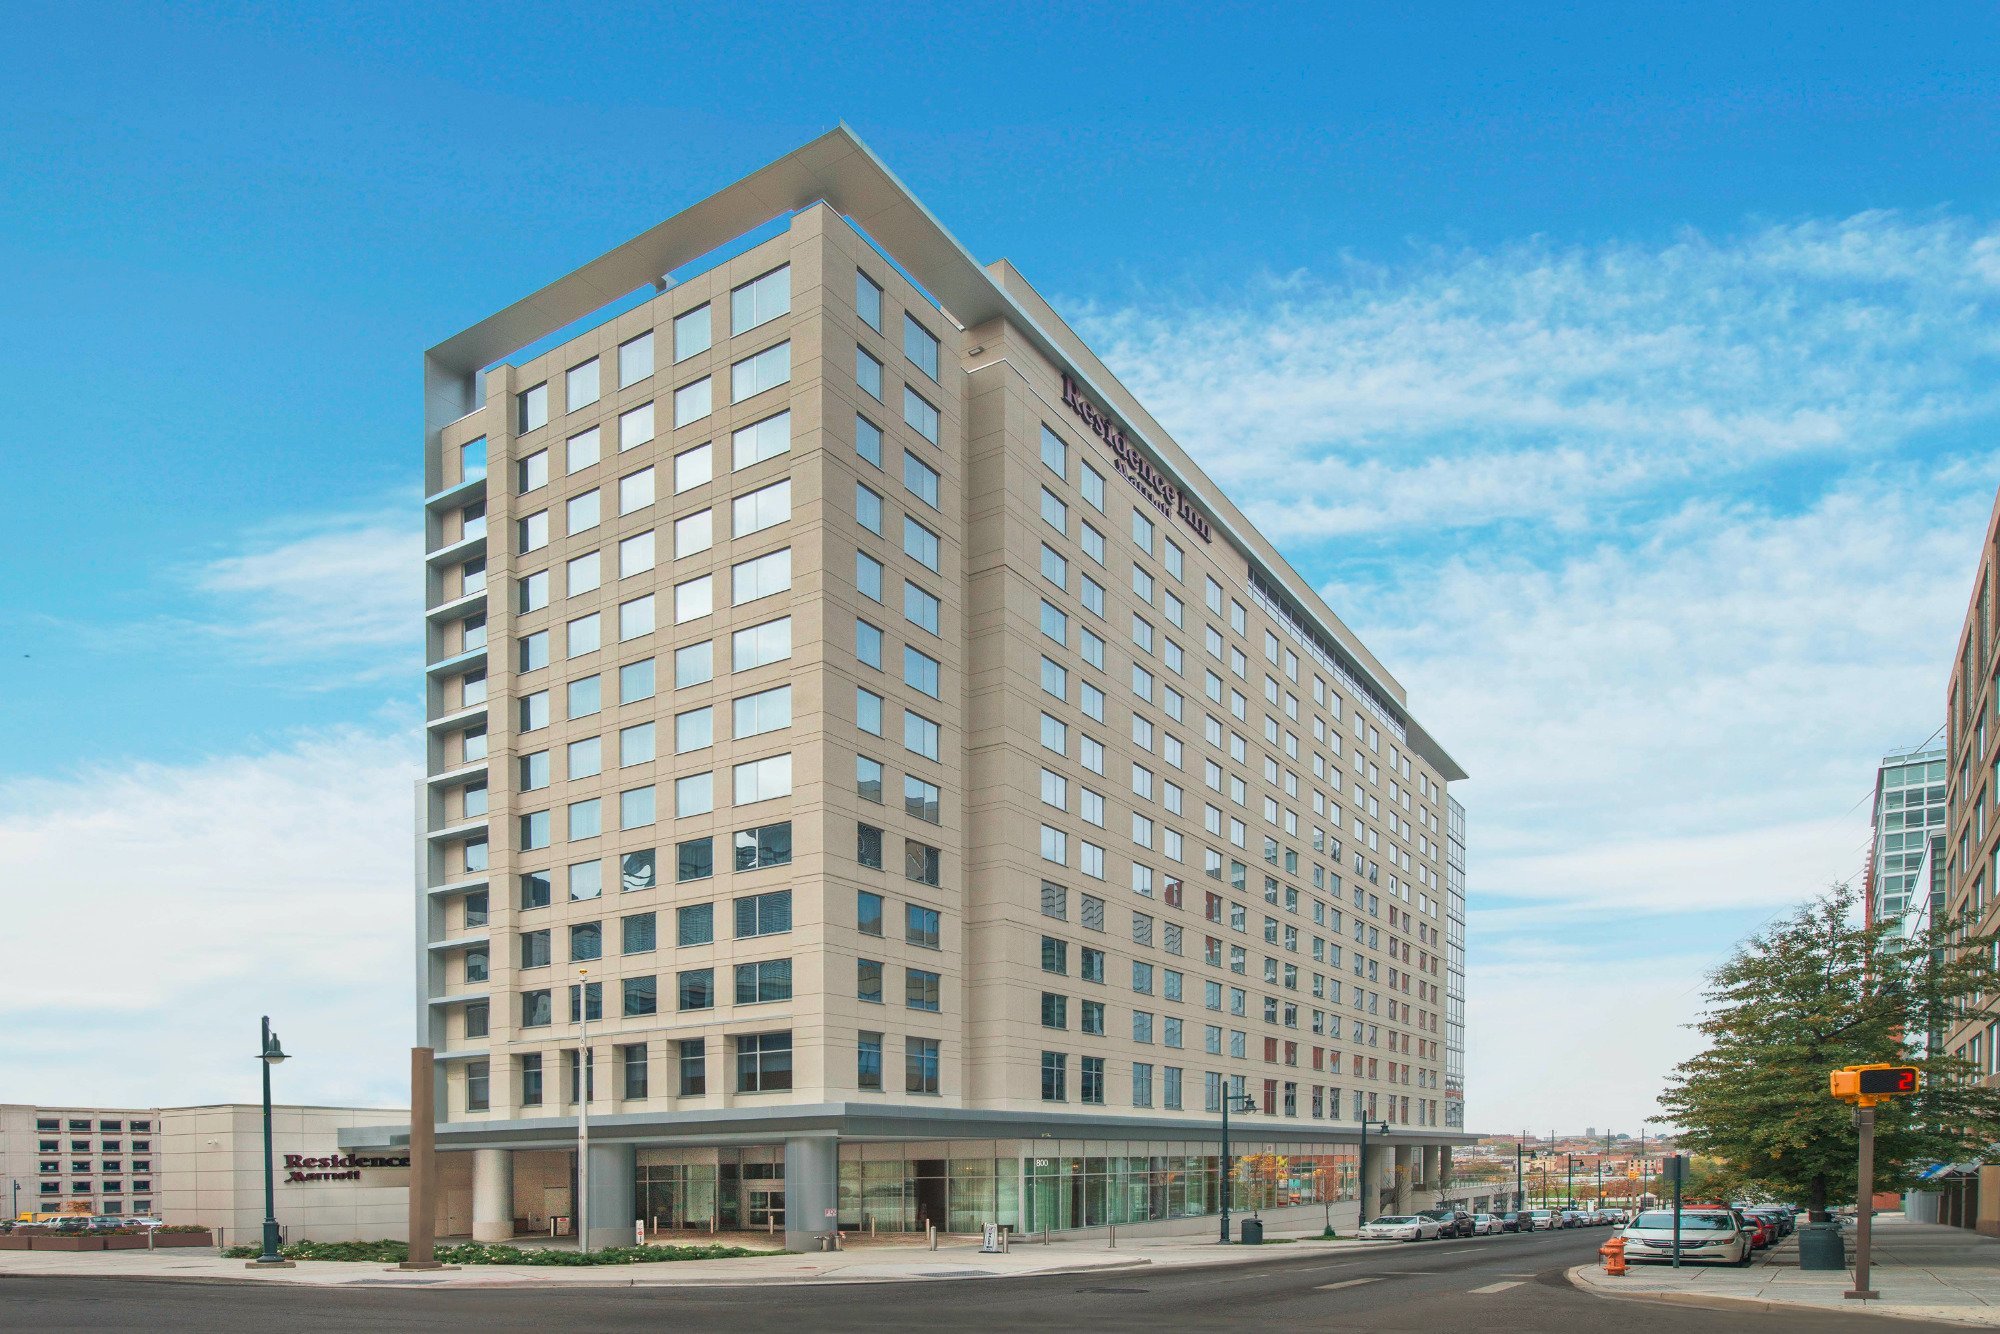 Photo of Residence Inn by Marriott Baltimore at The Johns Hopkins Medical Campus, Baltimore, MD